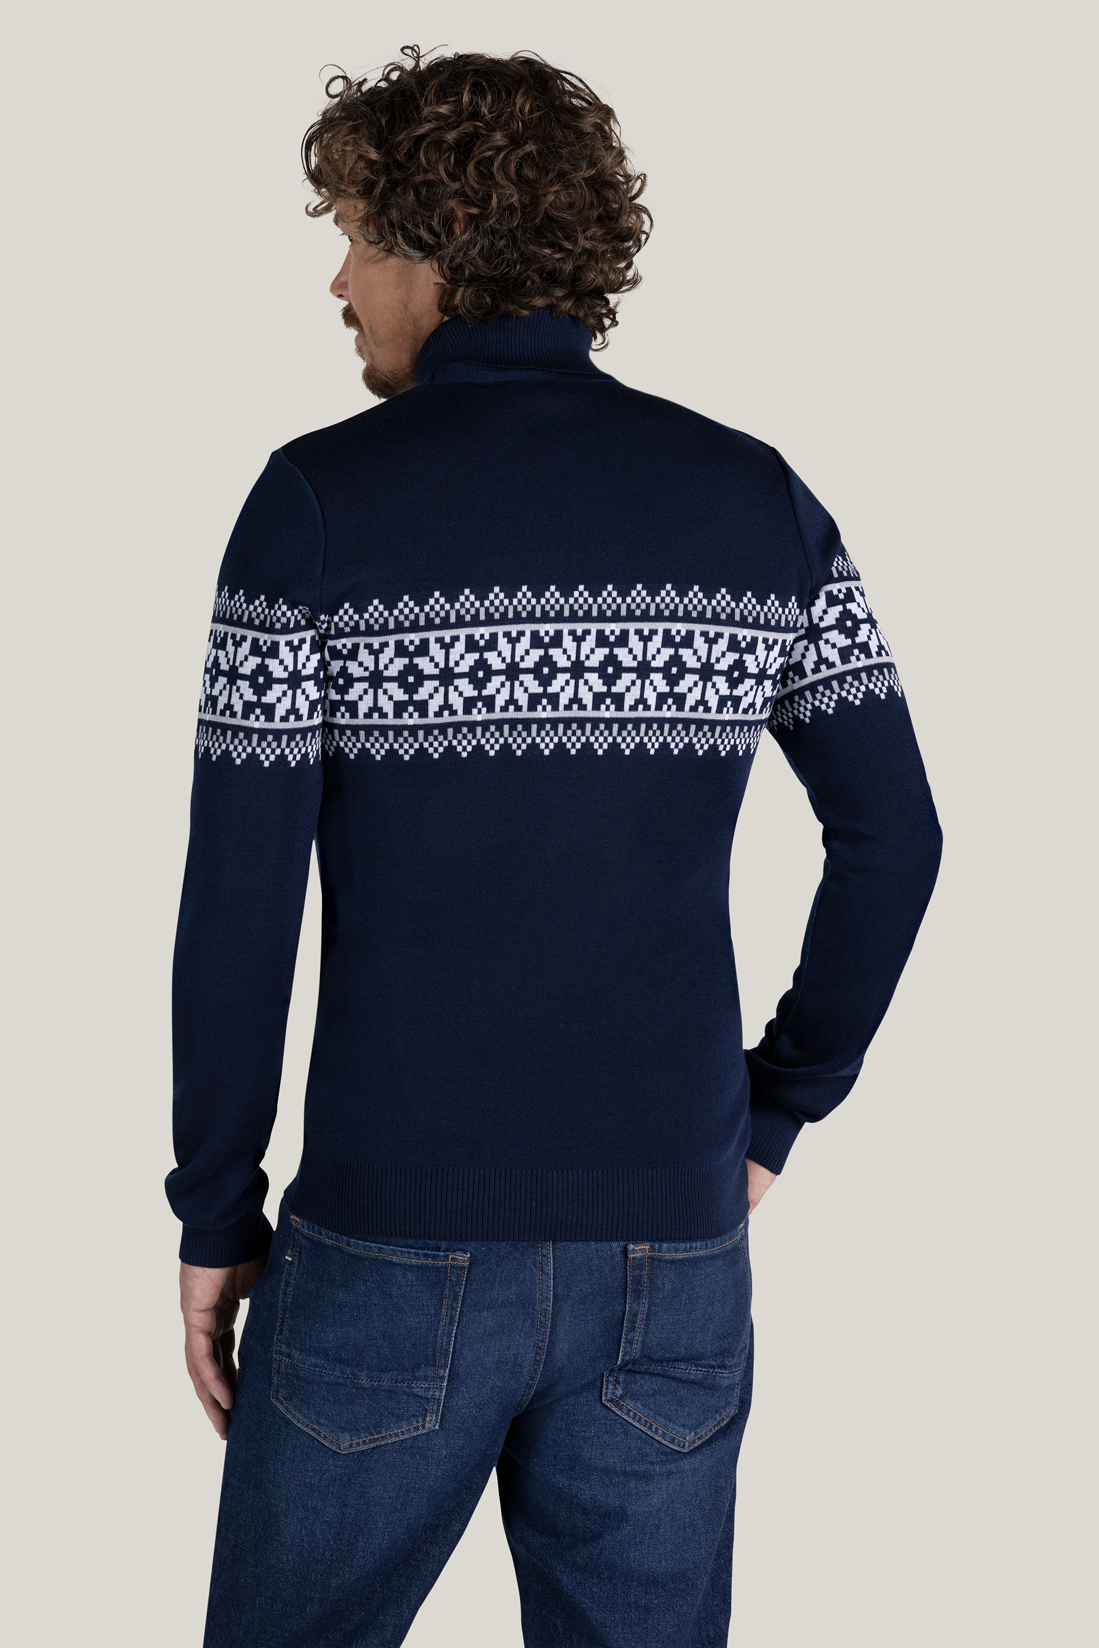 Nils turtleneck sweater in blue made of Merino and Tencel from Tidløs